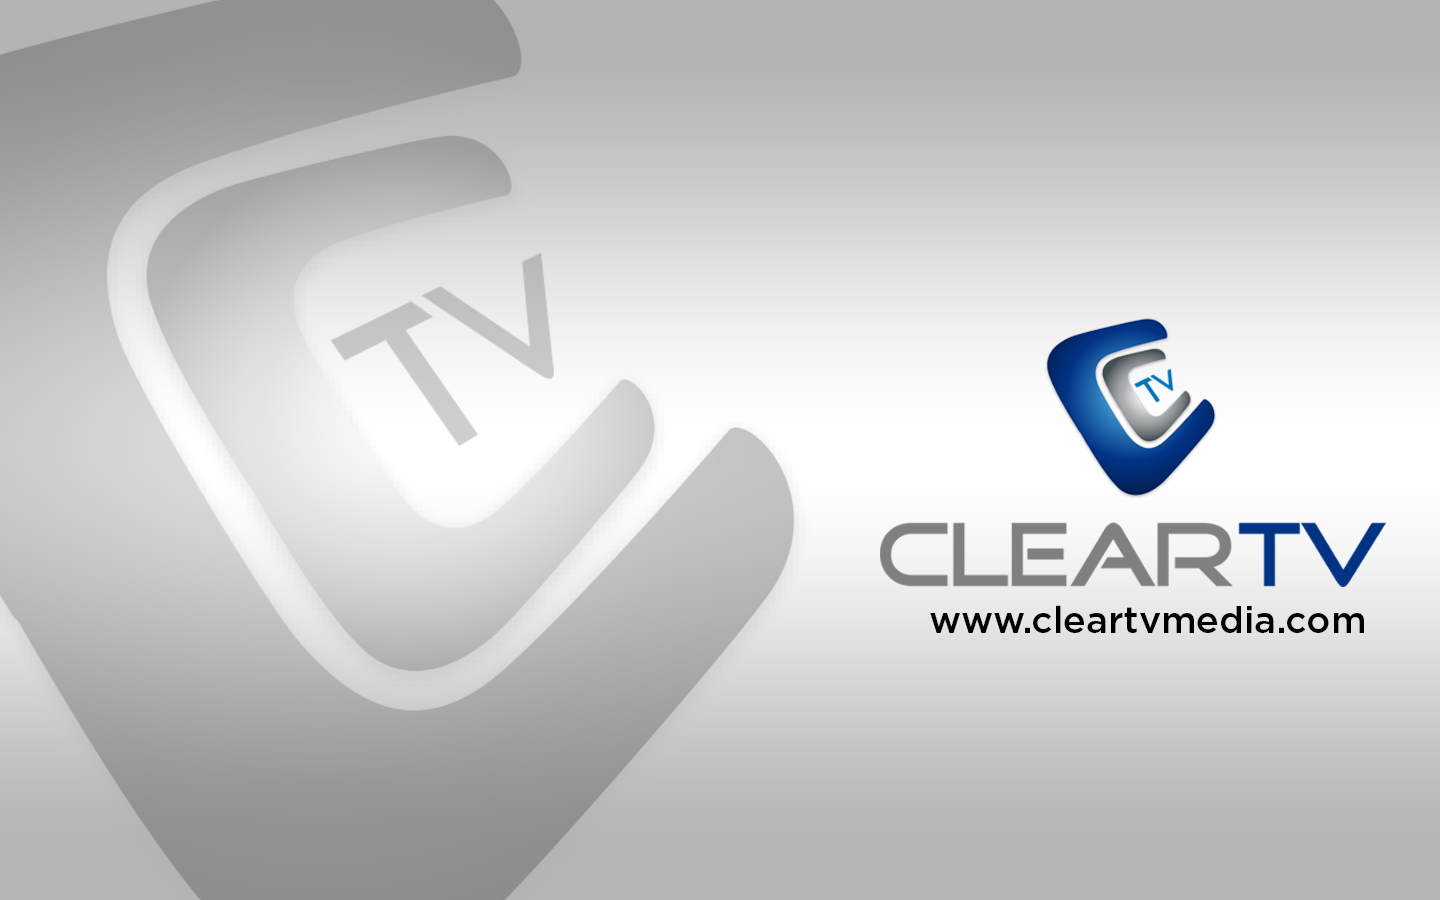 ClearTV